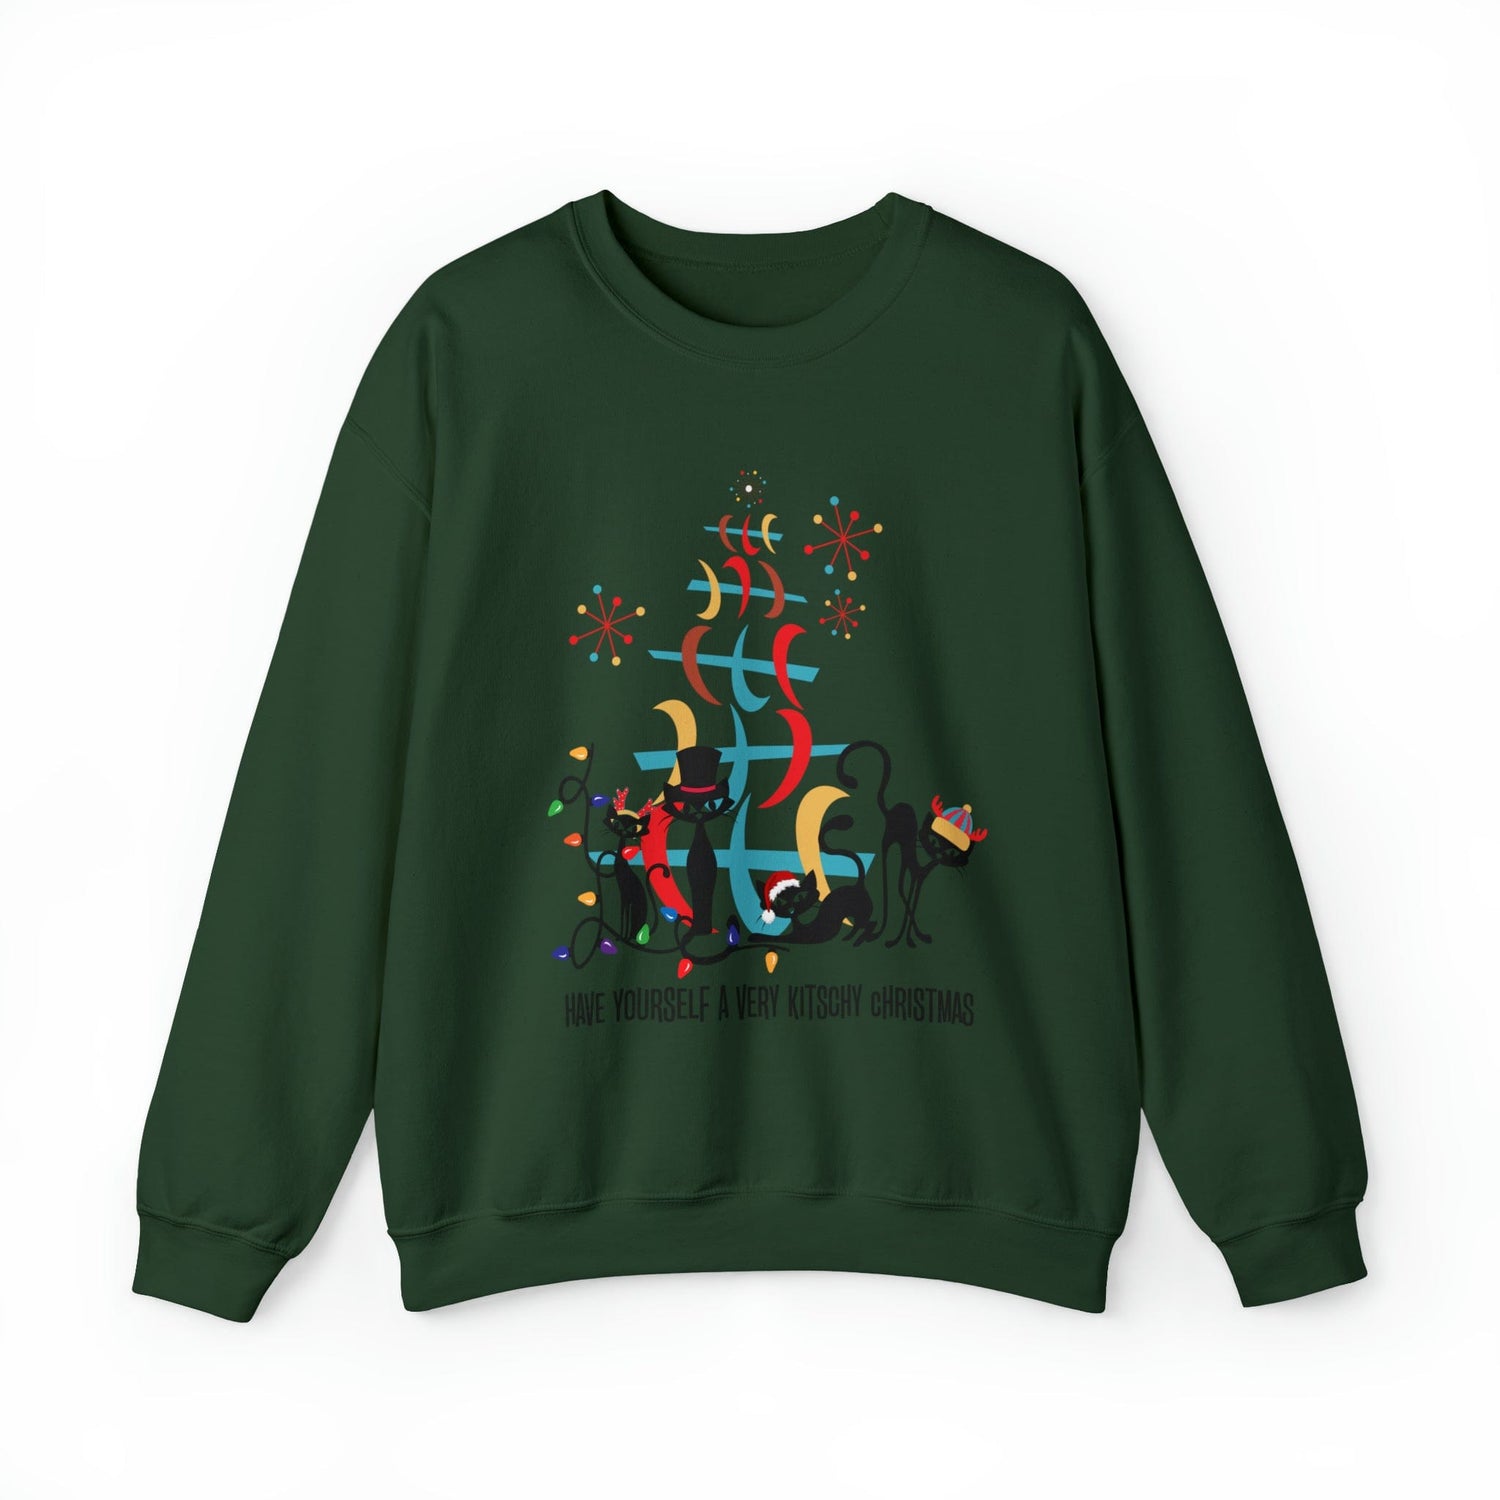 Atomic Cat Christmas Sweater, Have Yourself A Very Kitschy Christmas Cozy Loose Fit, Sweatshirt Sweatshirt S / Forest Green